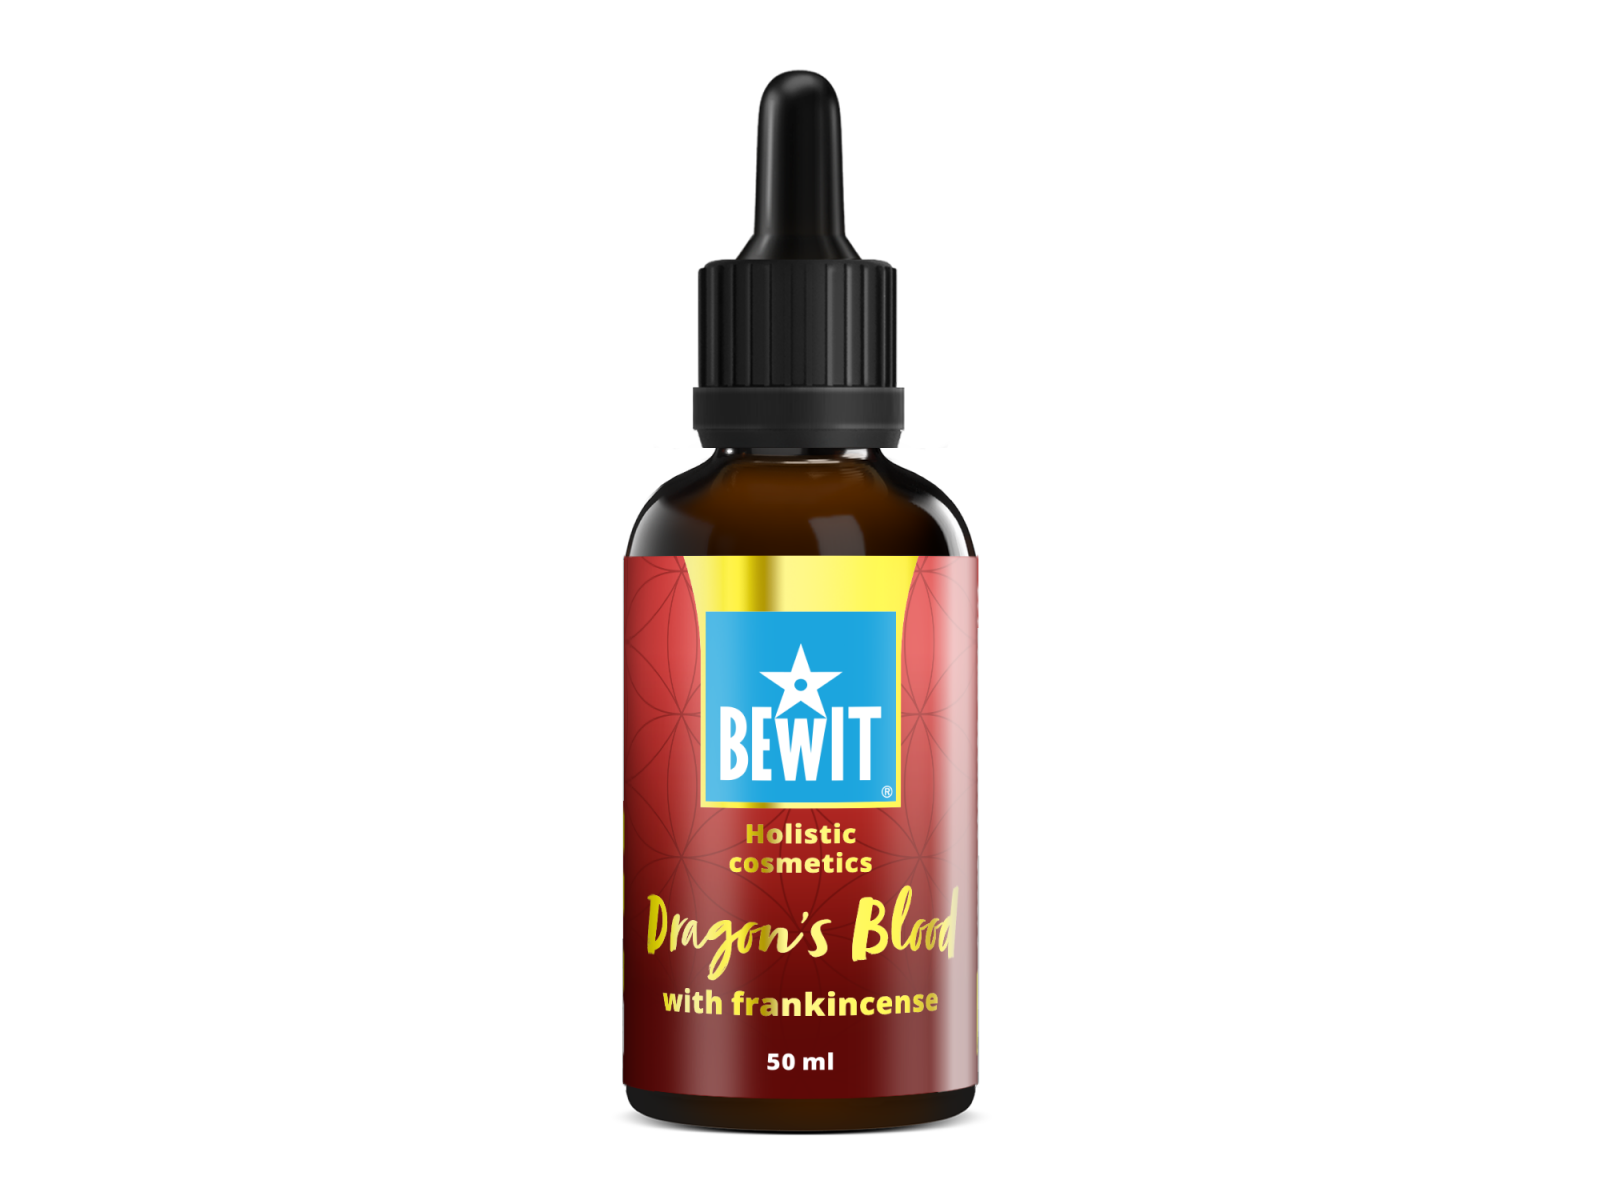 BEWIT Dragon's Blood with Frankincense Essential Oil - 100% natural cosmetic oil